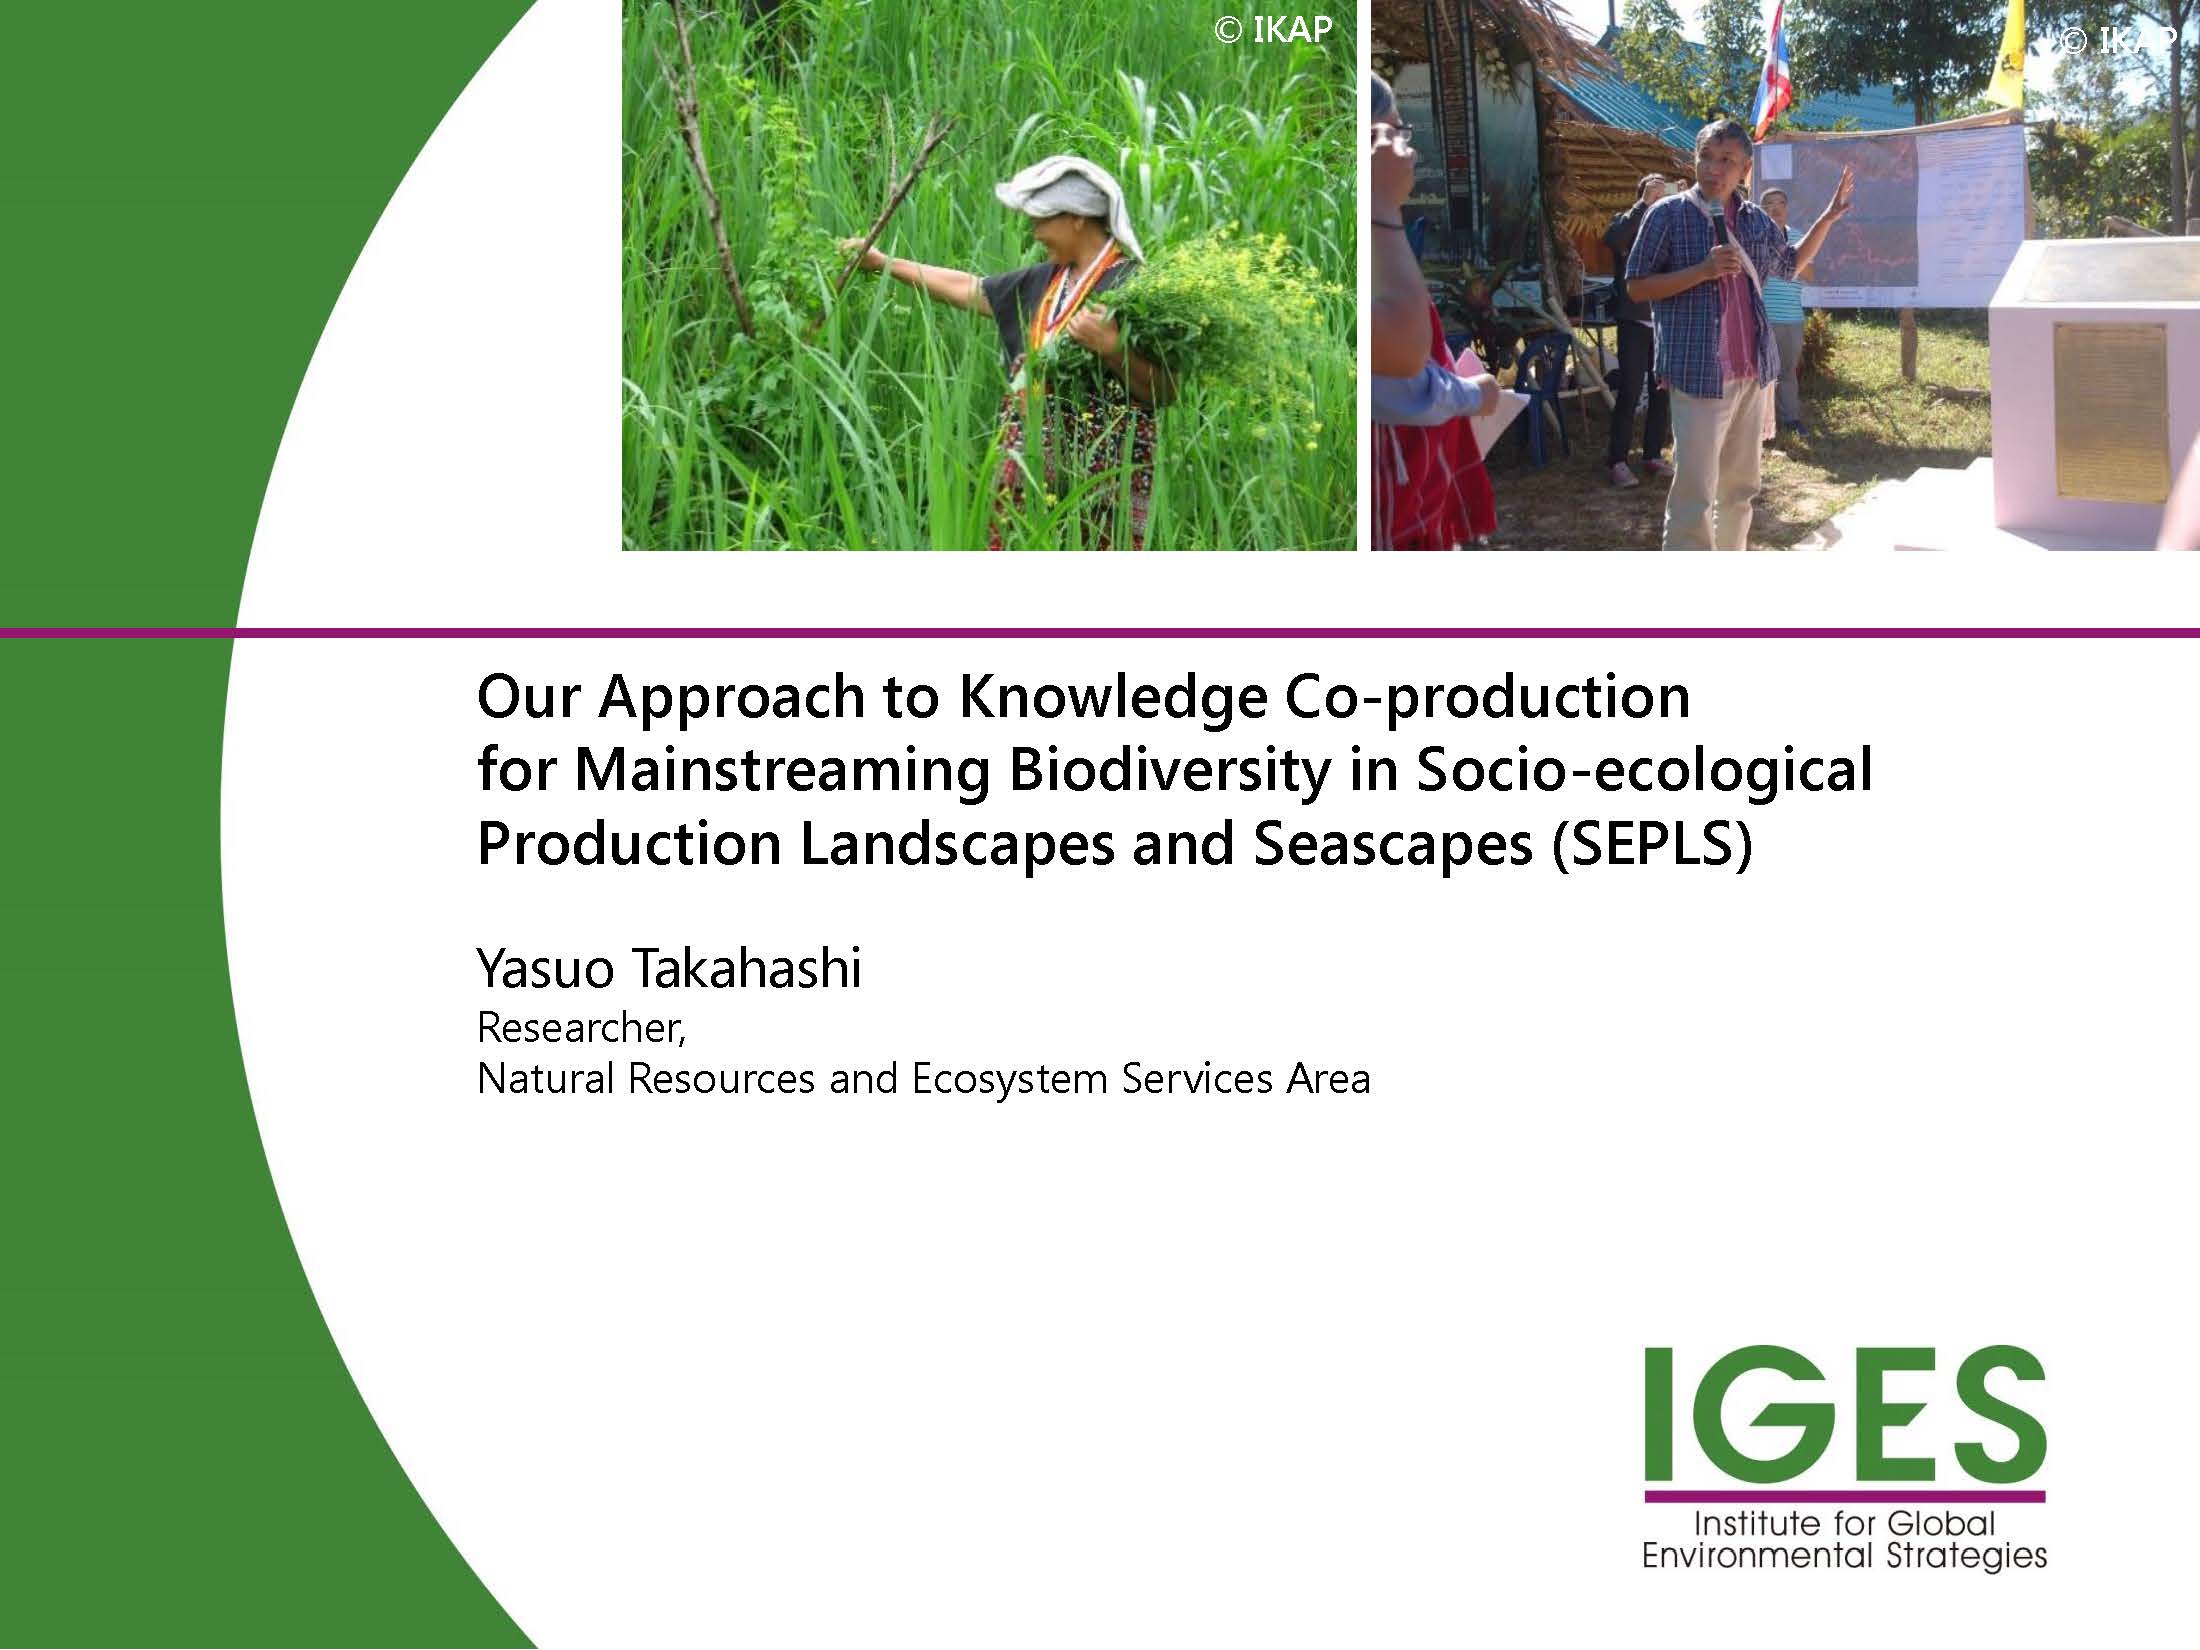 Our Approach to Knowledge Co-production for Mainstreaming Biodiversity in Socio-ecological Production Landscapes and Seascapes (SEPLS)